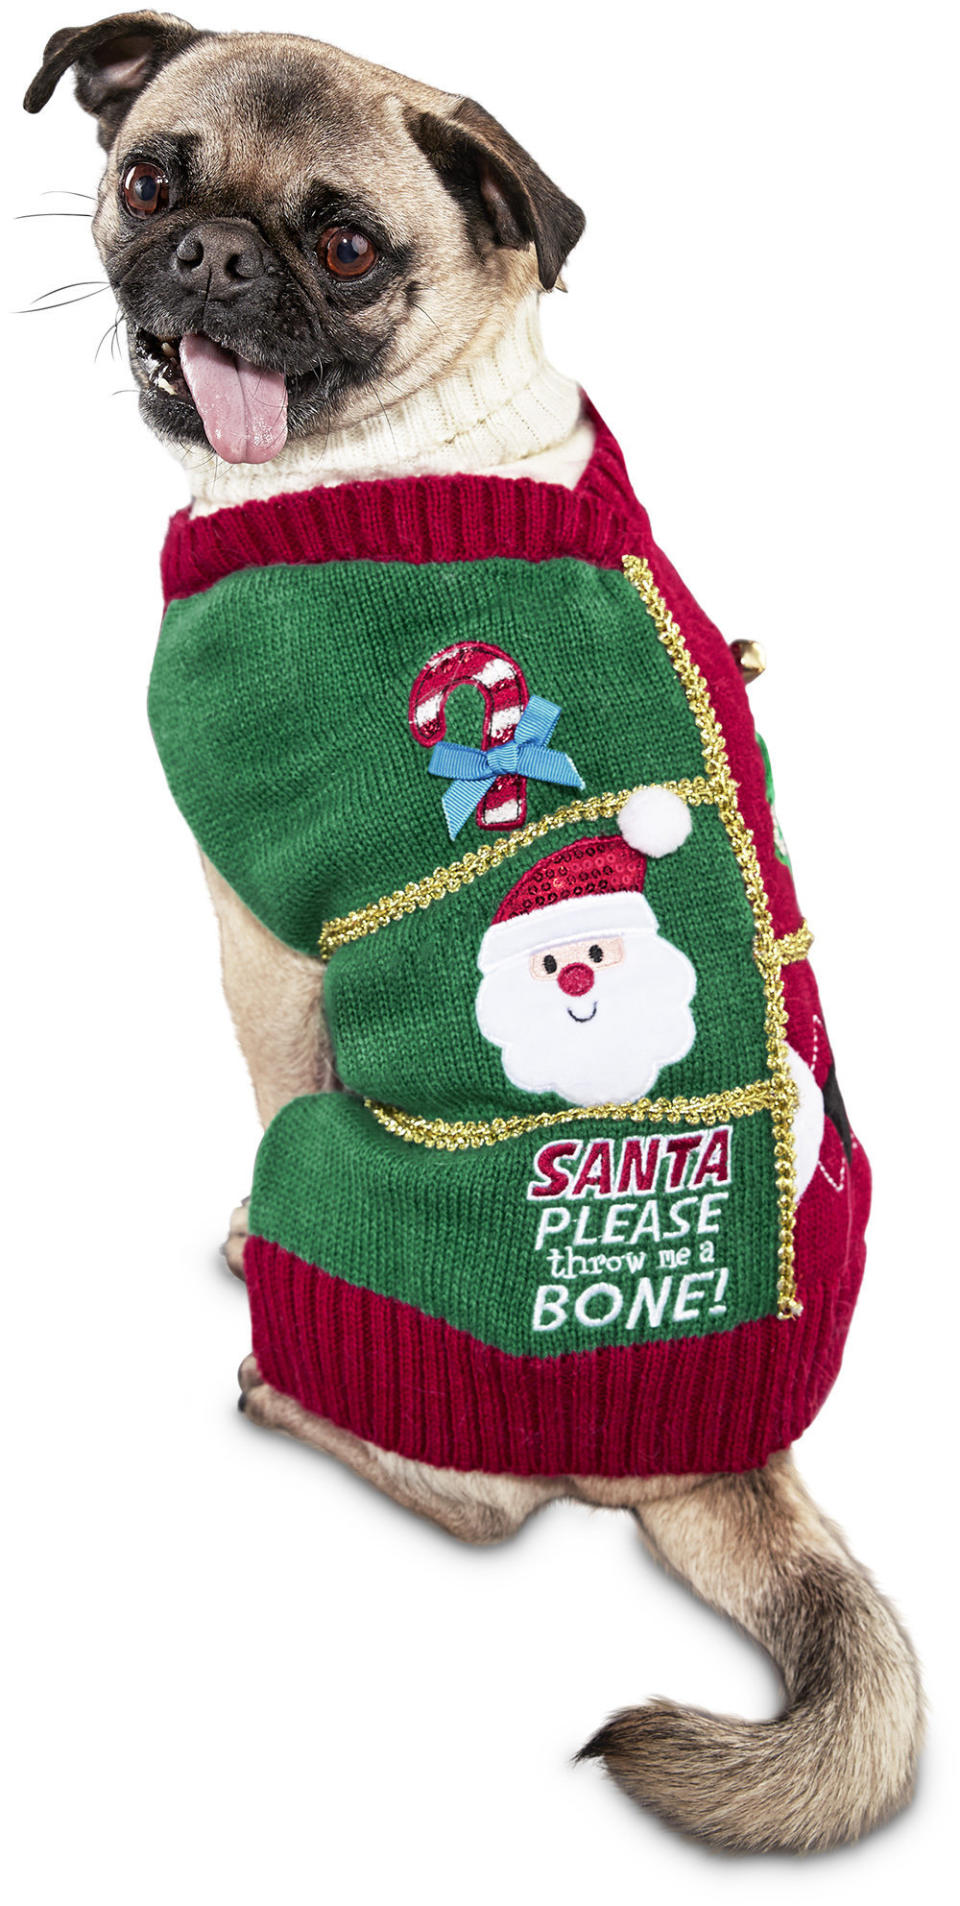 Yes, even dogs can join the <a href="https://www.petco.com/shop/en/petcostore/product/time-for-joy-ugly-christmas-dog-sweater-with-all-the-trimmings" target="_blank">ugly Christmas sweater </a>craze. Whether they want to or not is something we won't know until someone invents a canine communication device. Someone invent that device. Please.<a href="https://www.petco.com/shop/en/petcostore/product/time-for-joy-ugly-christmas-dog-sweater-with-all-the-trimmings"><br /><br /></a>